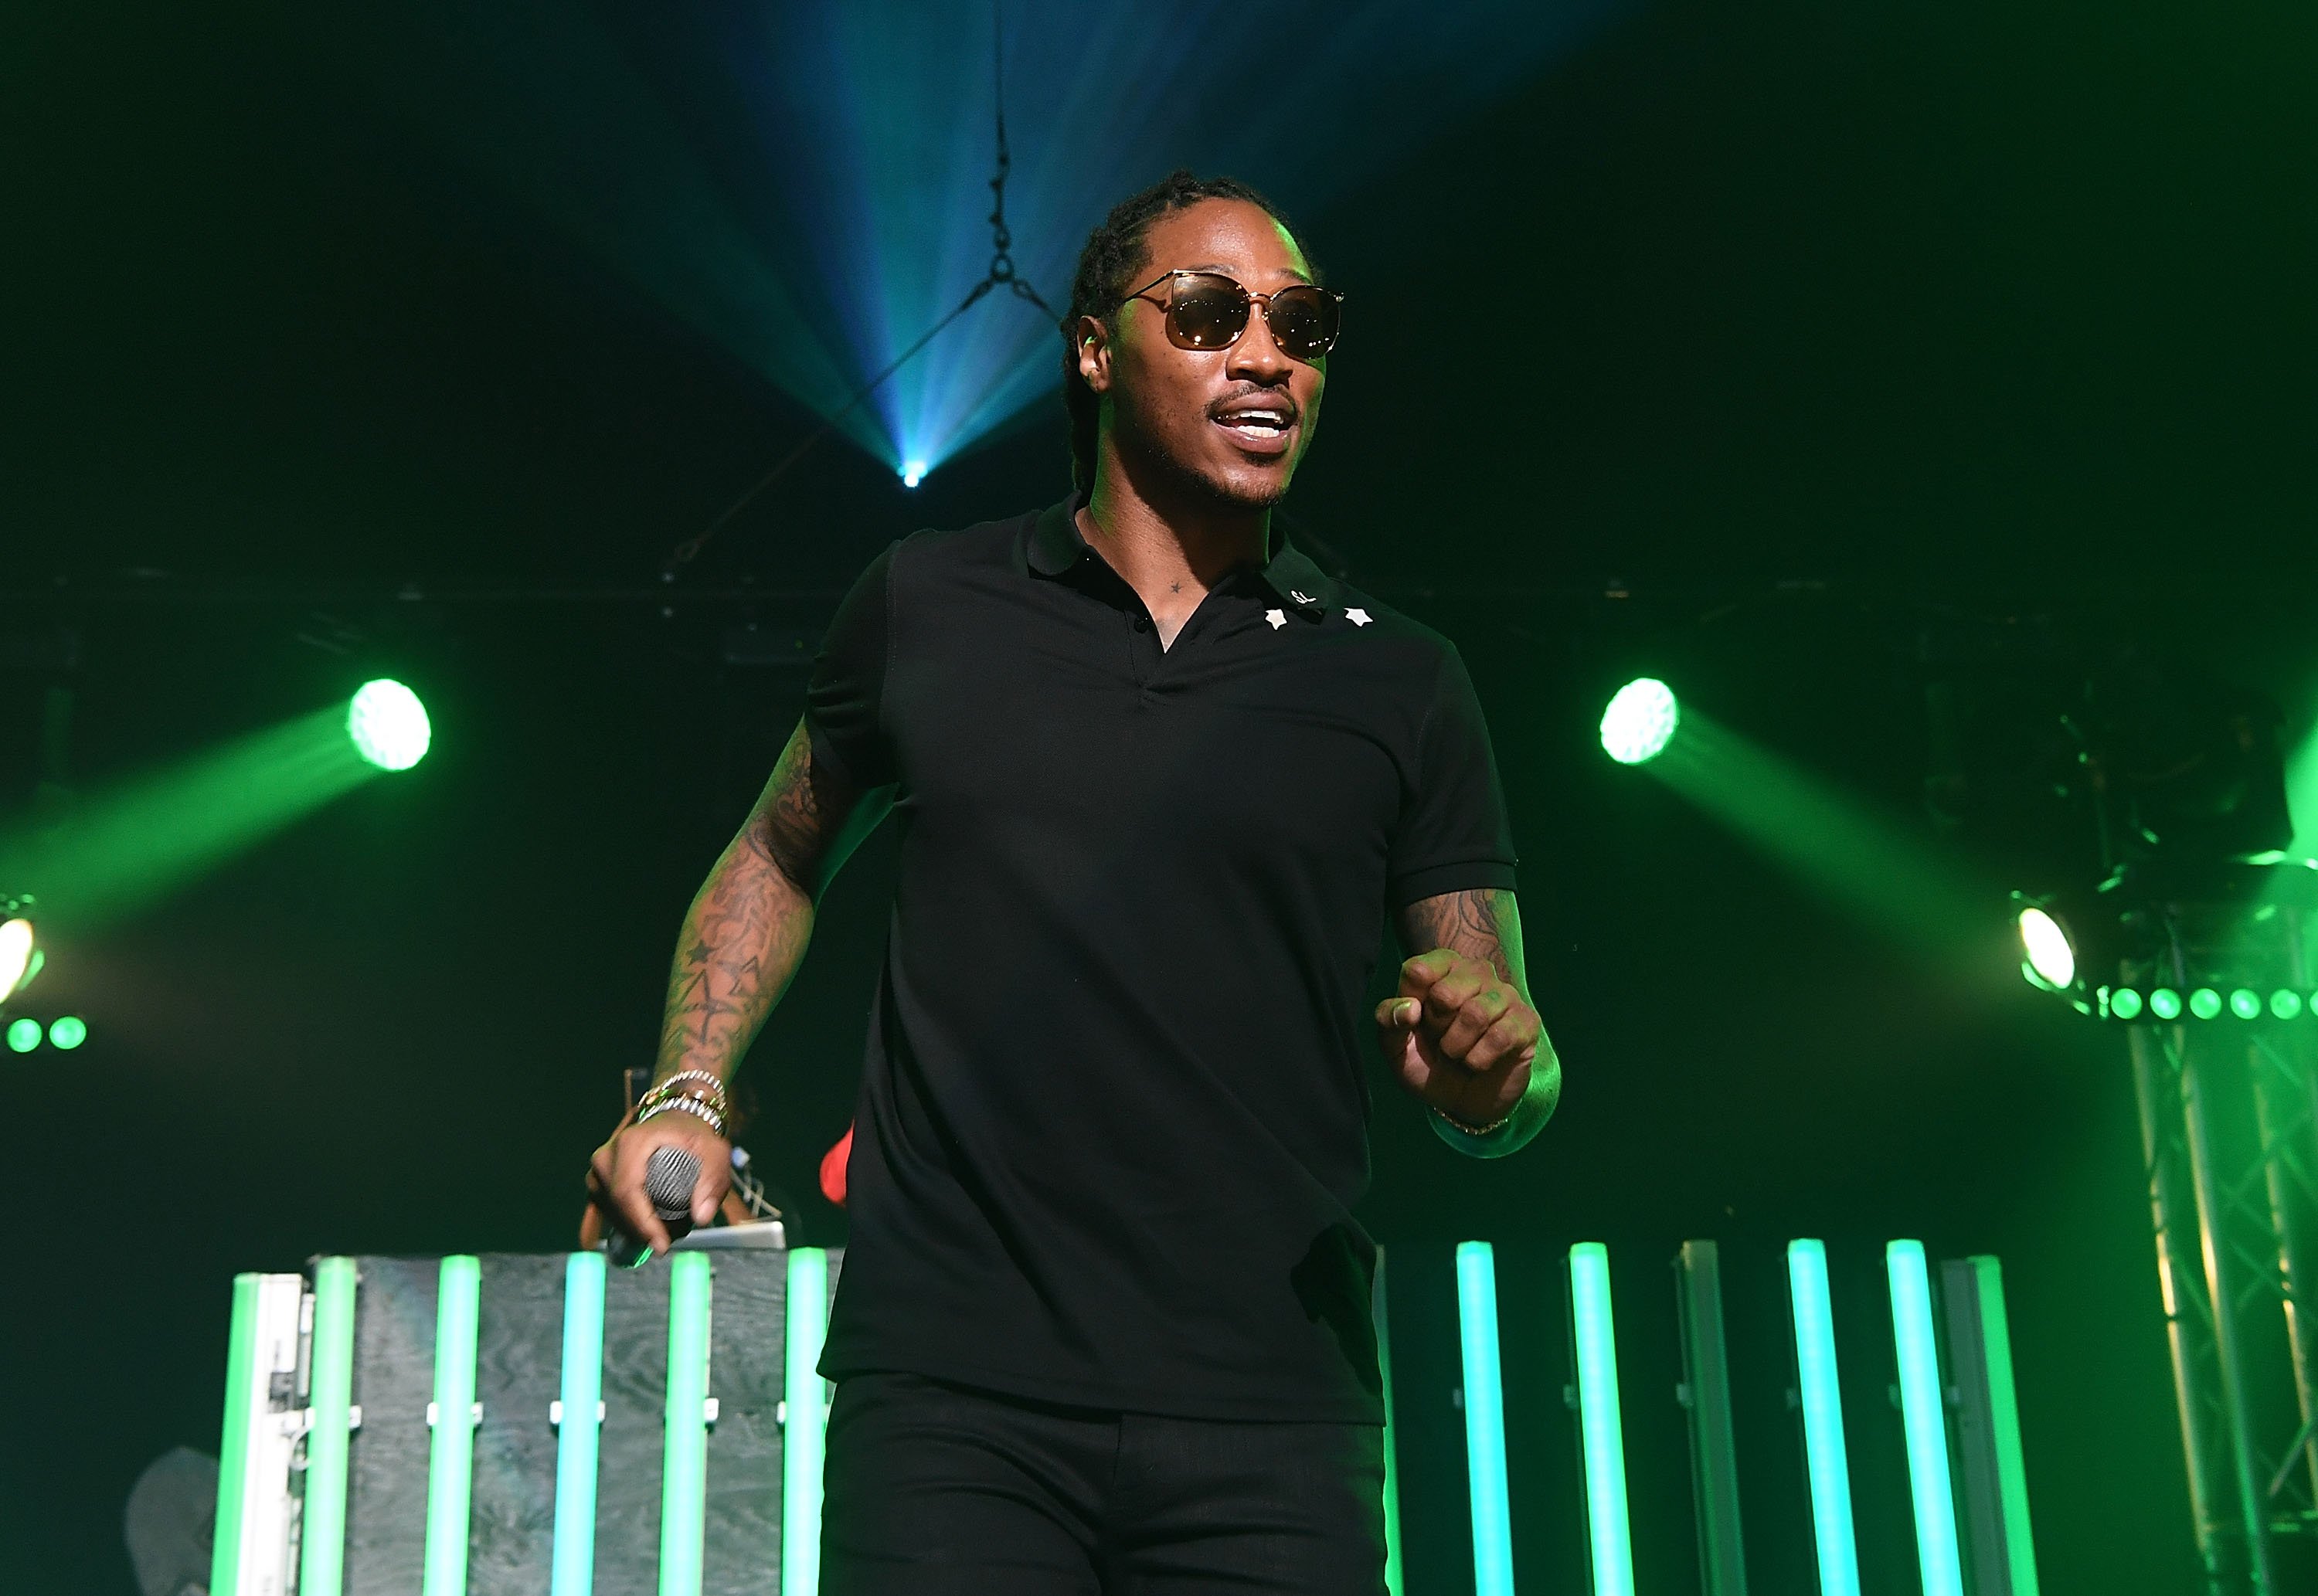 Rapper Future on stage at Gucci and Friends Homecoming Concert in Atlanta, Georgia on July 22, 2016 | Photo: Getty Images